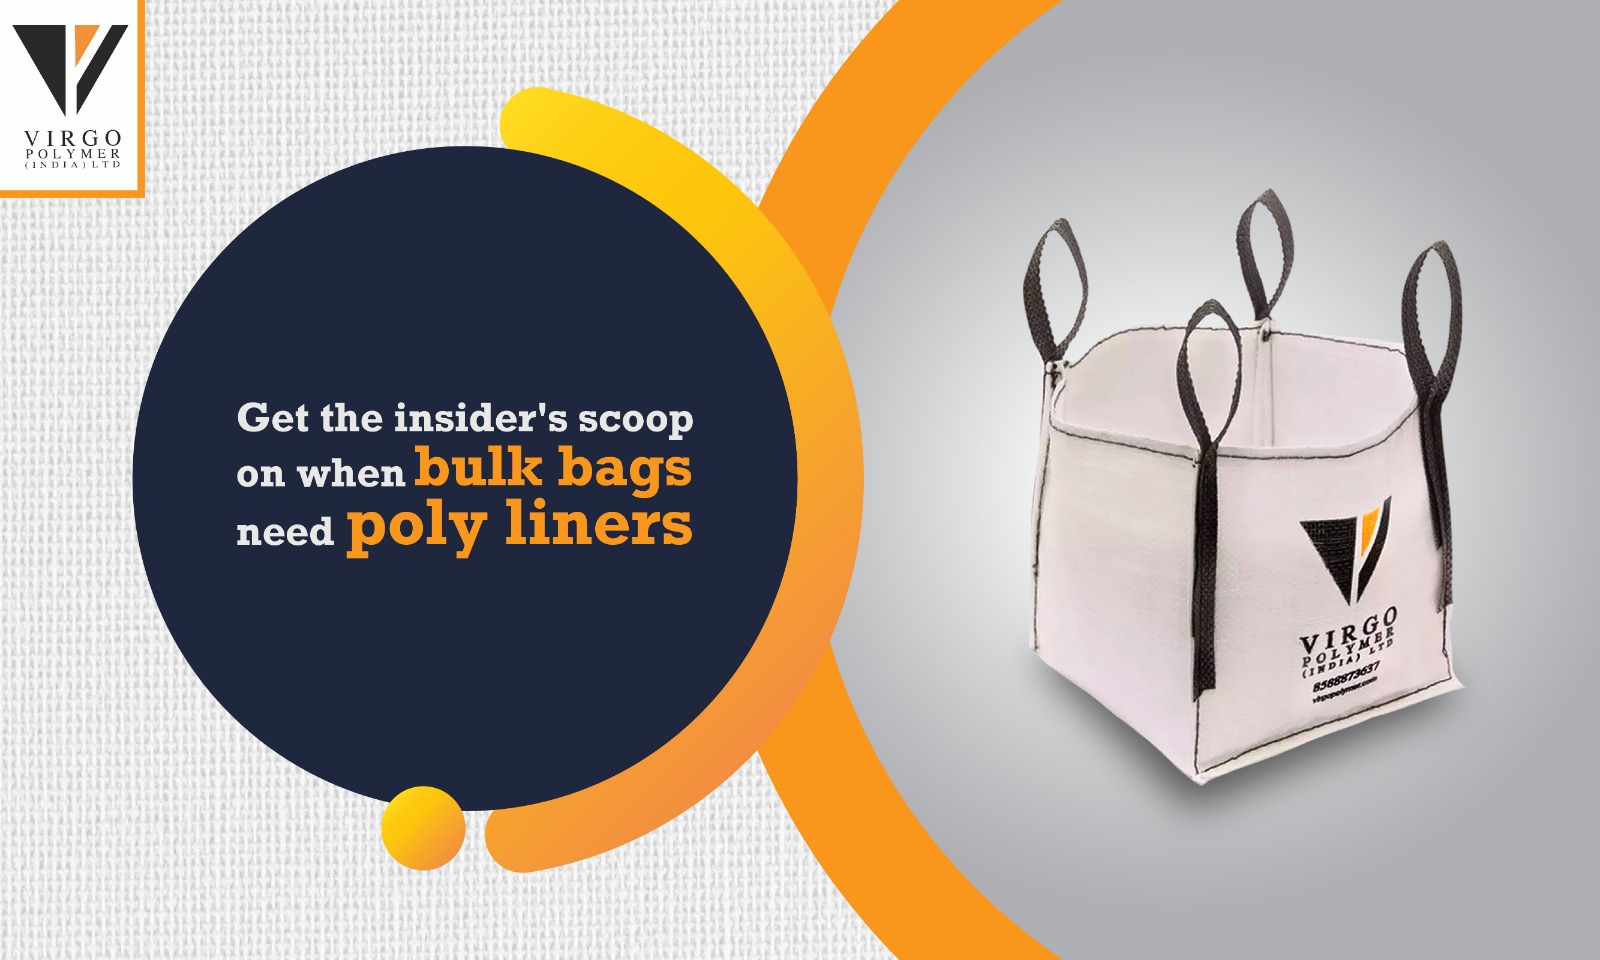 When should you consider poly liners for bulk bags? 